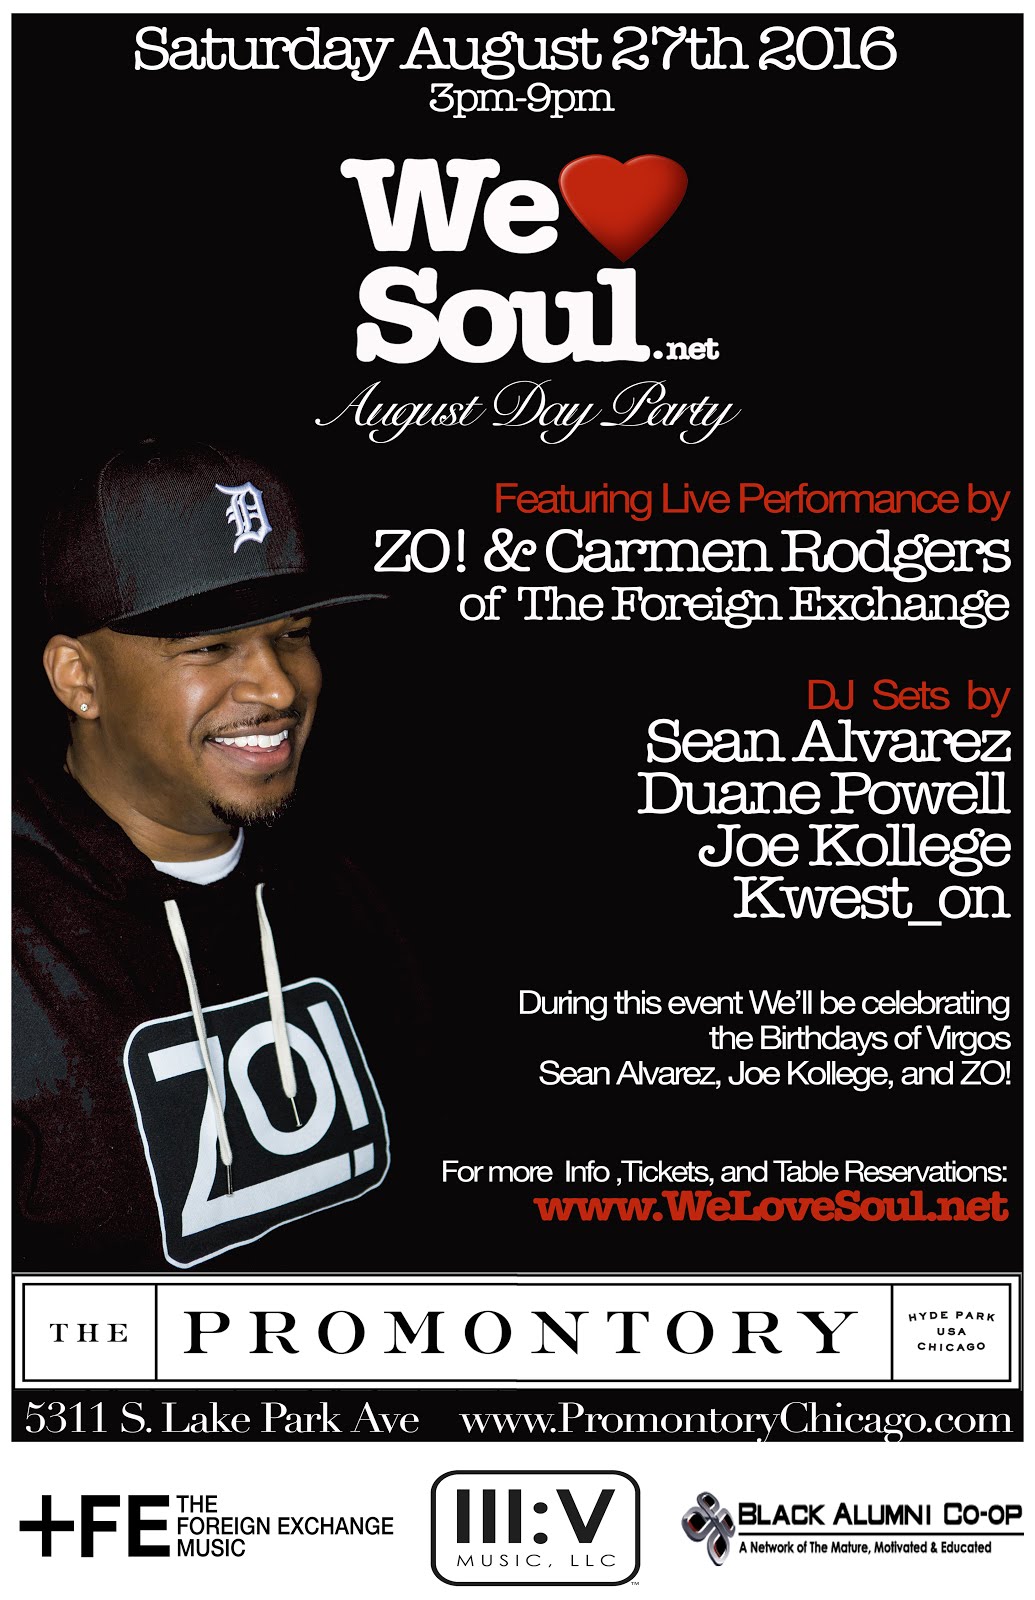 Sat Aug. 27th: We Love Soul August Day Party feat. ZO! & Carmen Rodgers LIVE!!!